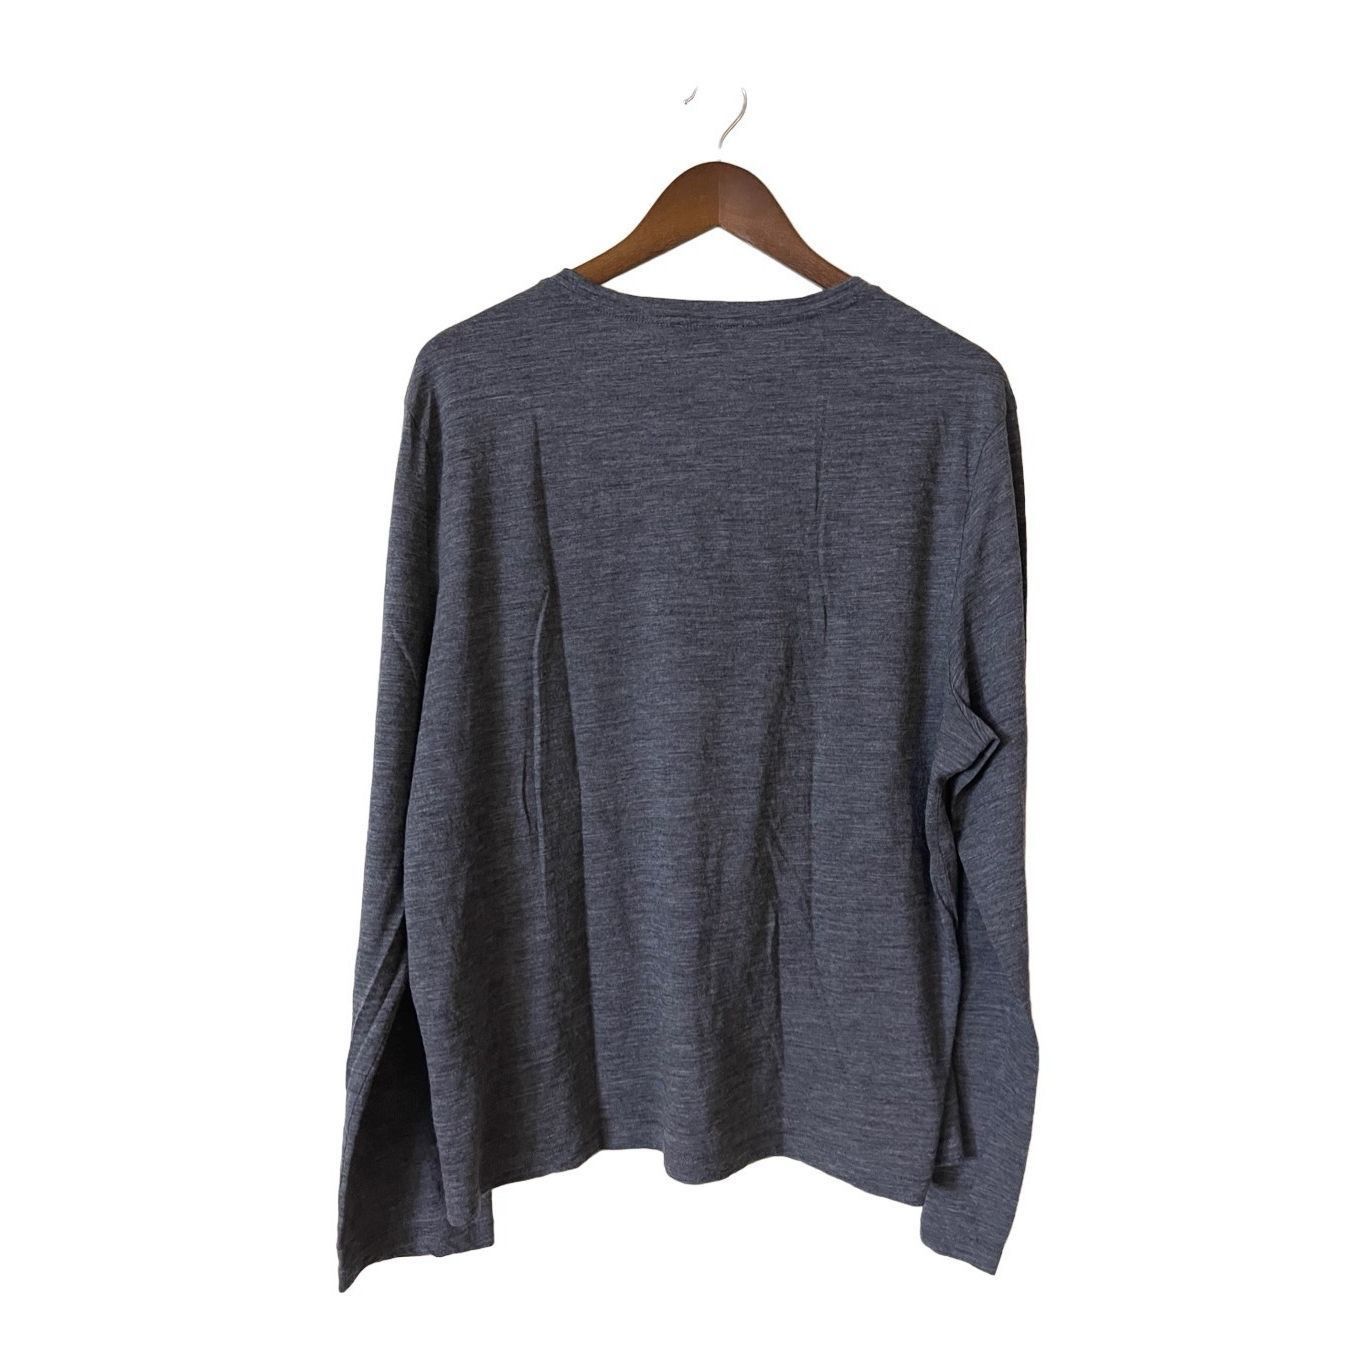 Cos COS 100% Wool Grey Crewneck Long Sleeve Lightweight Sweater Size US L / EU 52-54 / 3 - 2 Preview